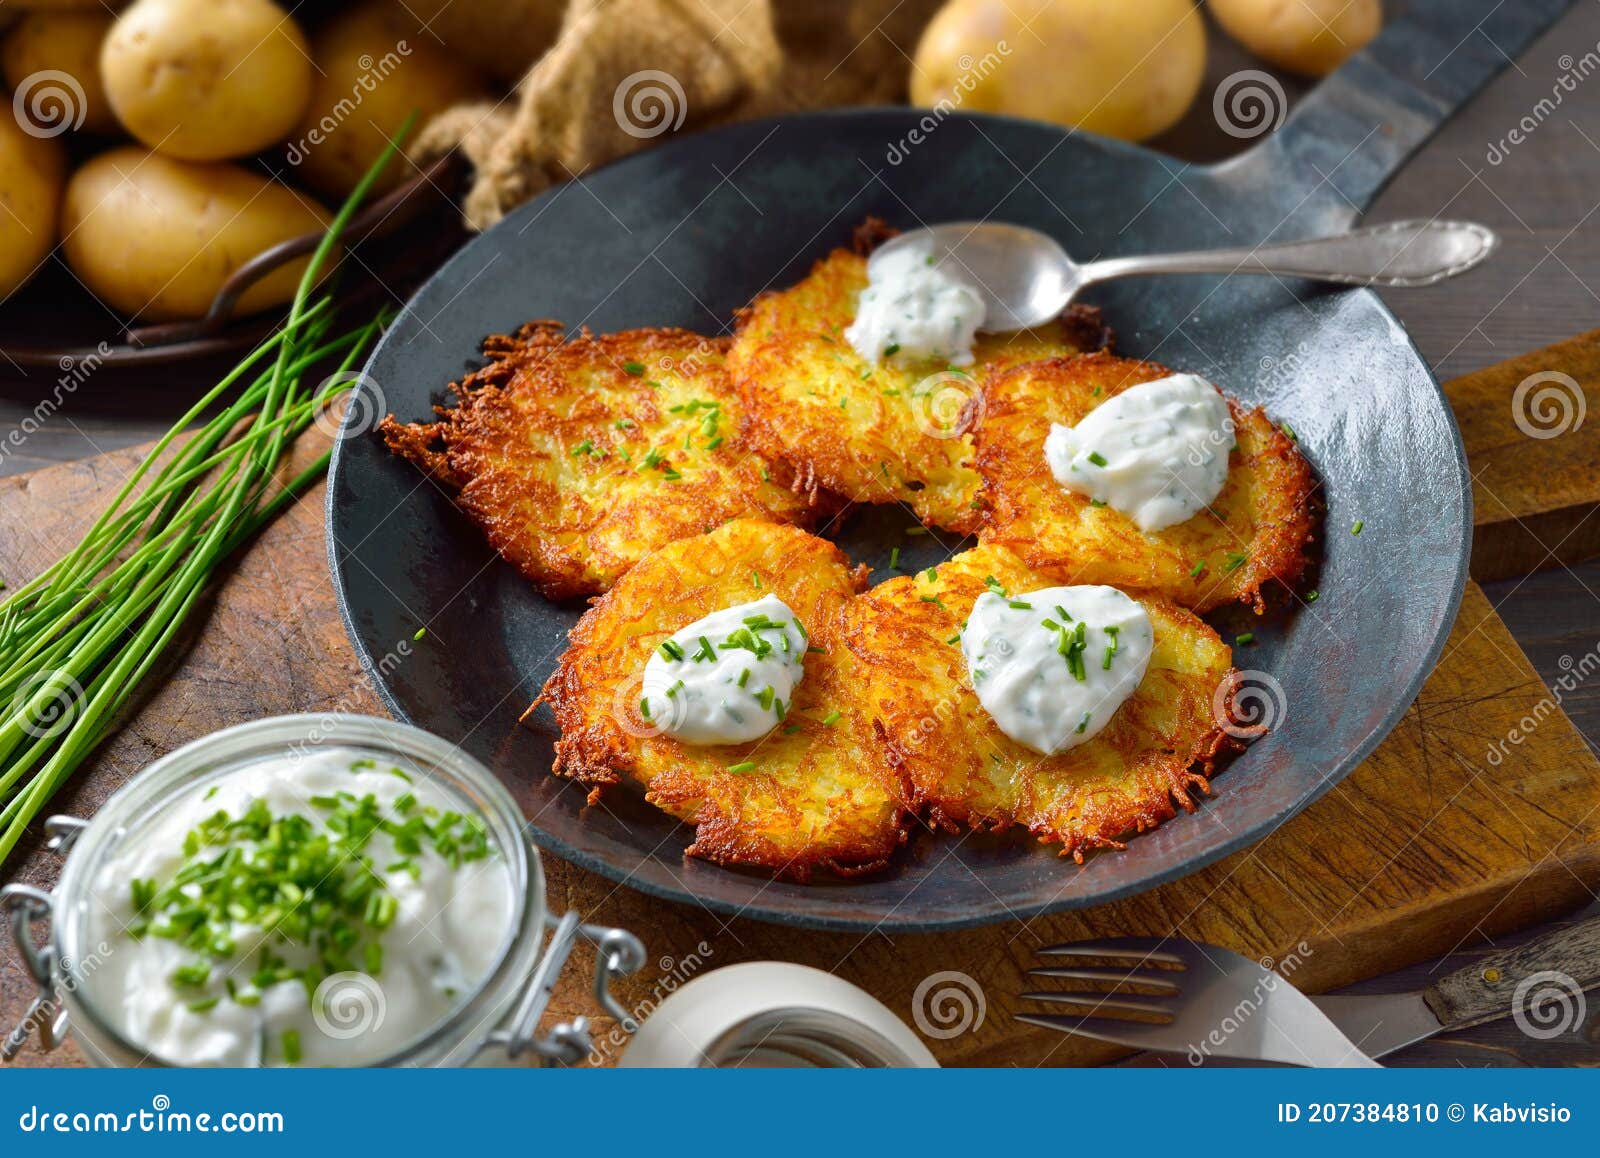 potato pancakes with curd and chives